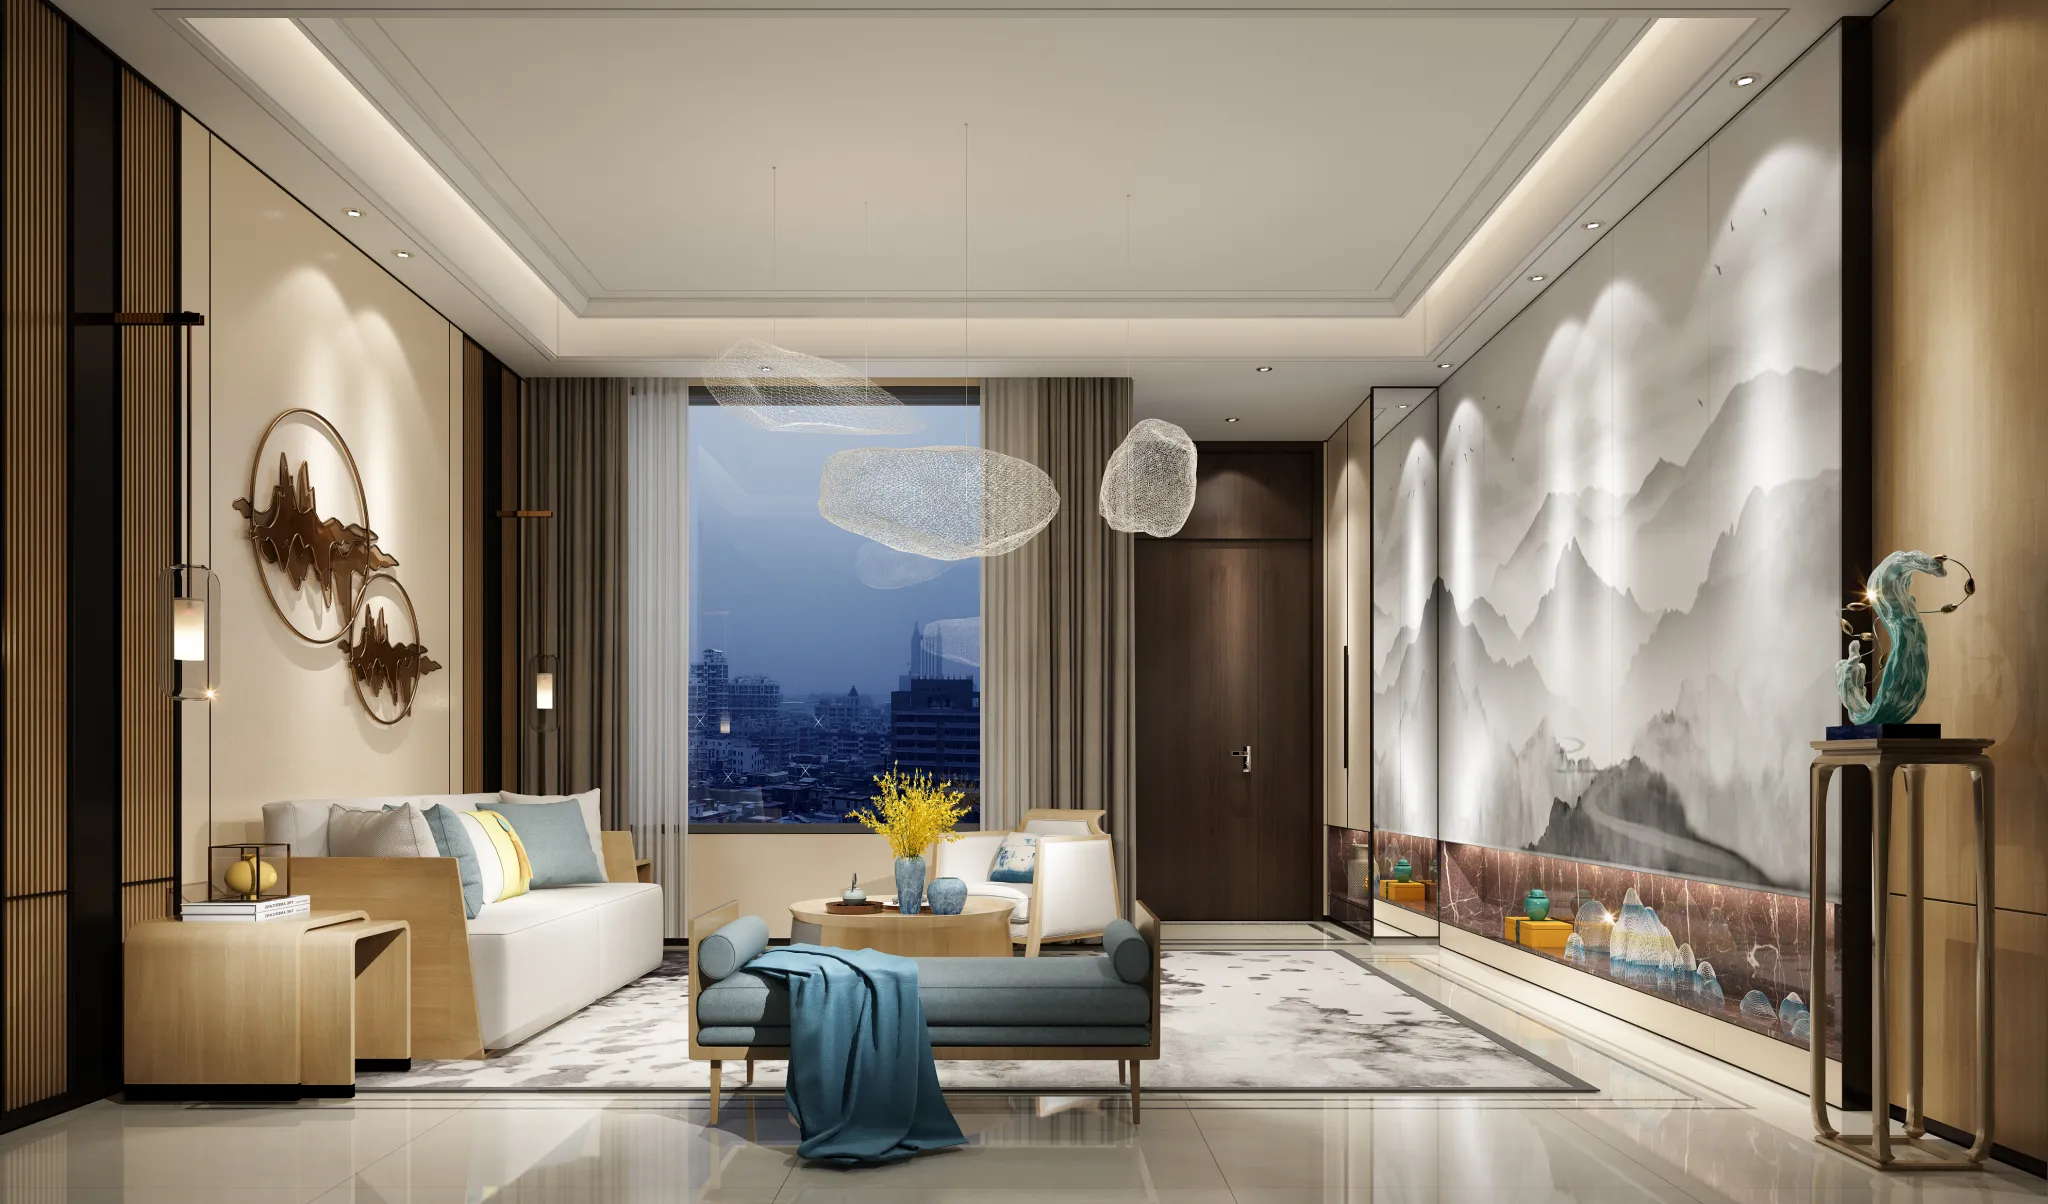 DESMOD INTERIOR 2021 (VRAY) – 4. LIVING ROOM – CHINESE – 086